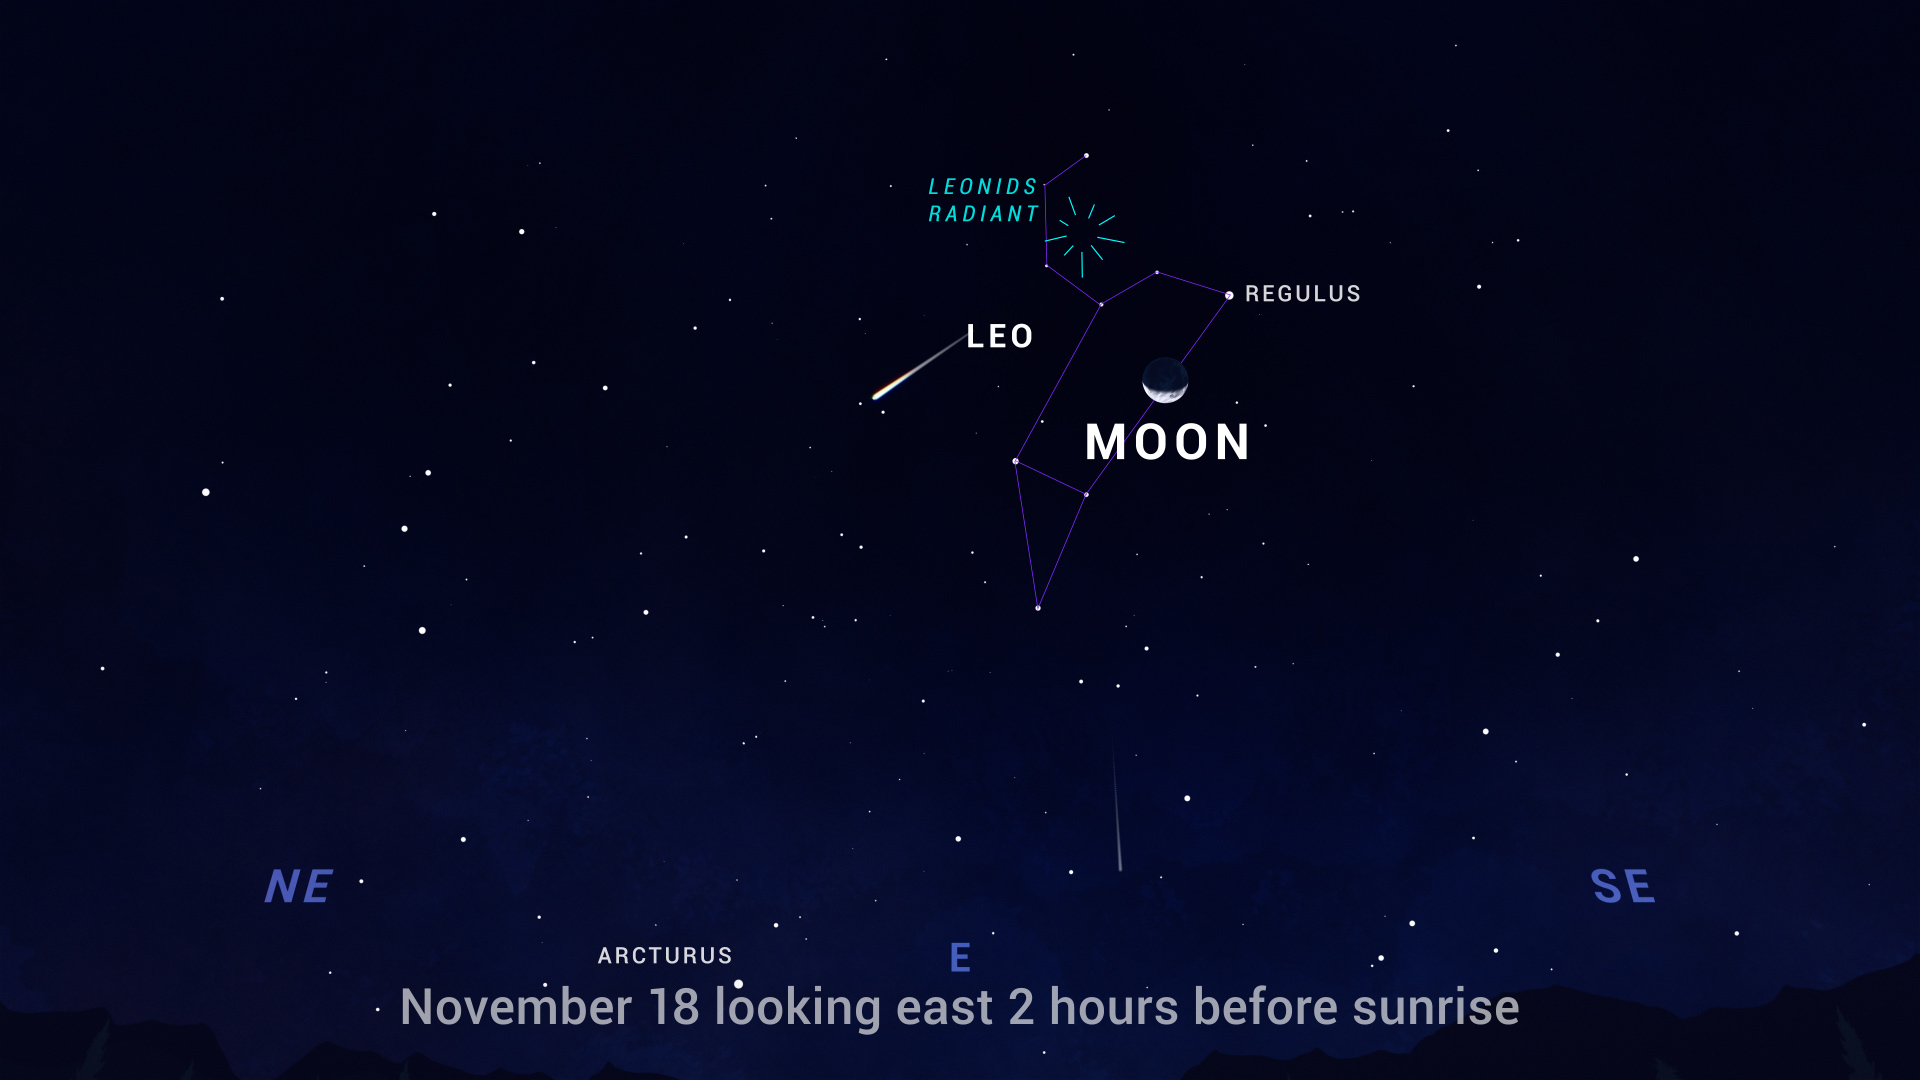 An illustration of the night sky shows the positions of the stars facing east before sunrise on November 18. The constellation Leo is outlined, and the place on the sky from which the meteors appear to radiate, called the radiant, is labeled above center. The crescent Moon is visible beneath Leo.